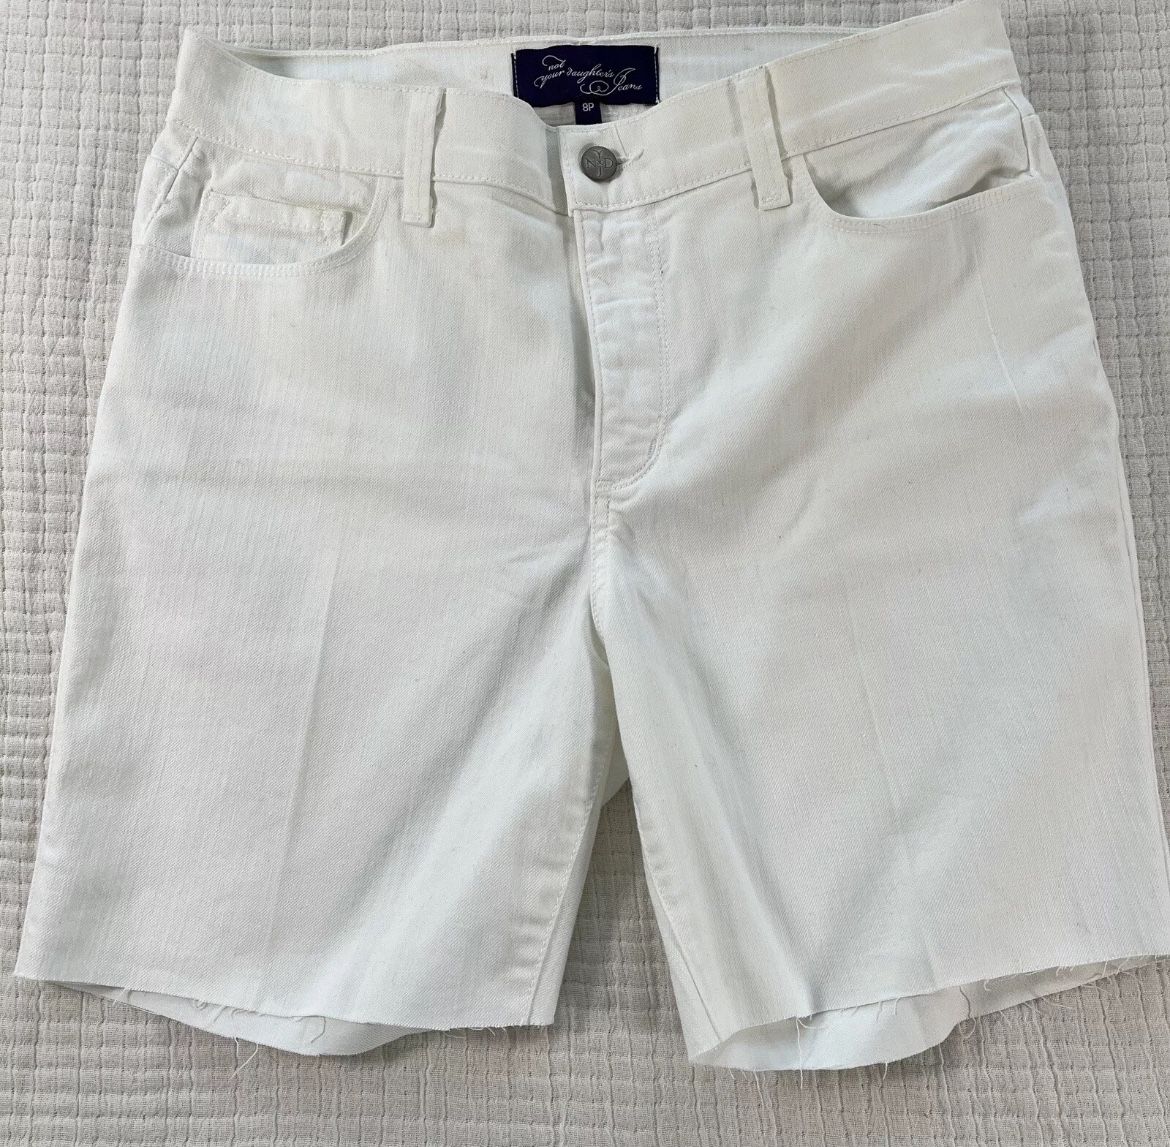 NYDJ Womens White Cut Off Denim Jean Shorts Lift Tuck Stretch Size 8P Comfort   Measurements approximately: Rise 10.25 Inseam 6.5 Waist 31   Good used